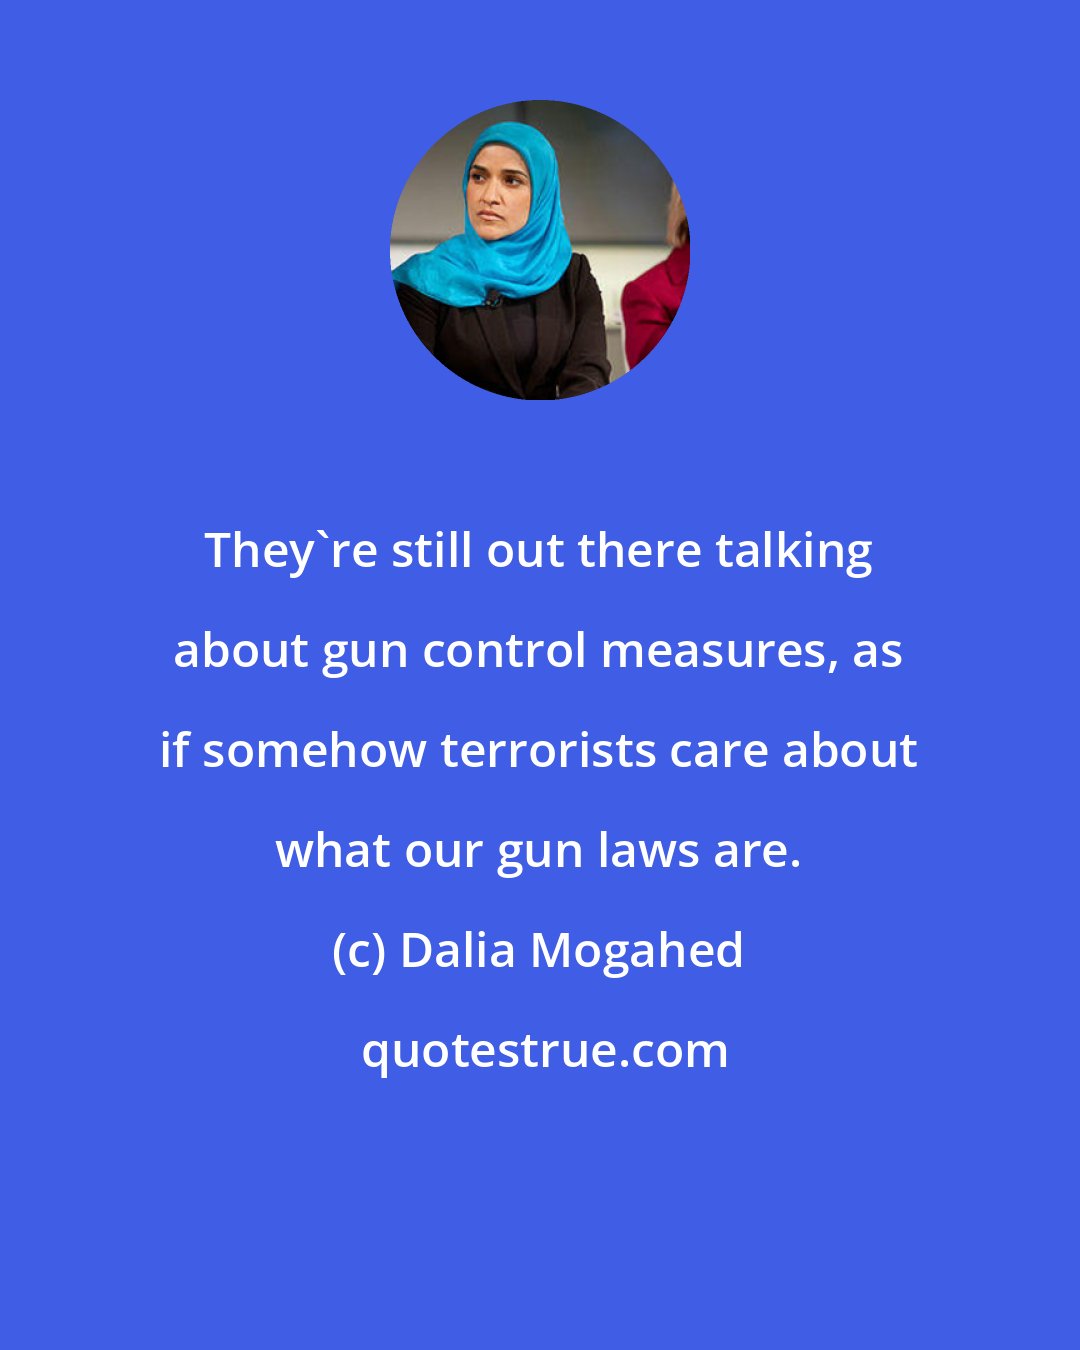 Dalia Mogahed: They're still out there talking about gun control measures, as if somehow terrorists care about what our gun laws are.